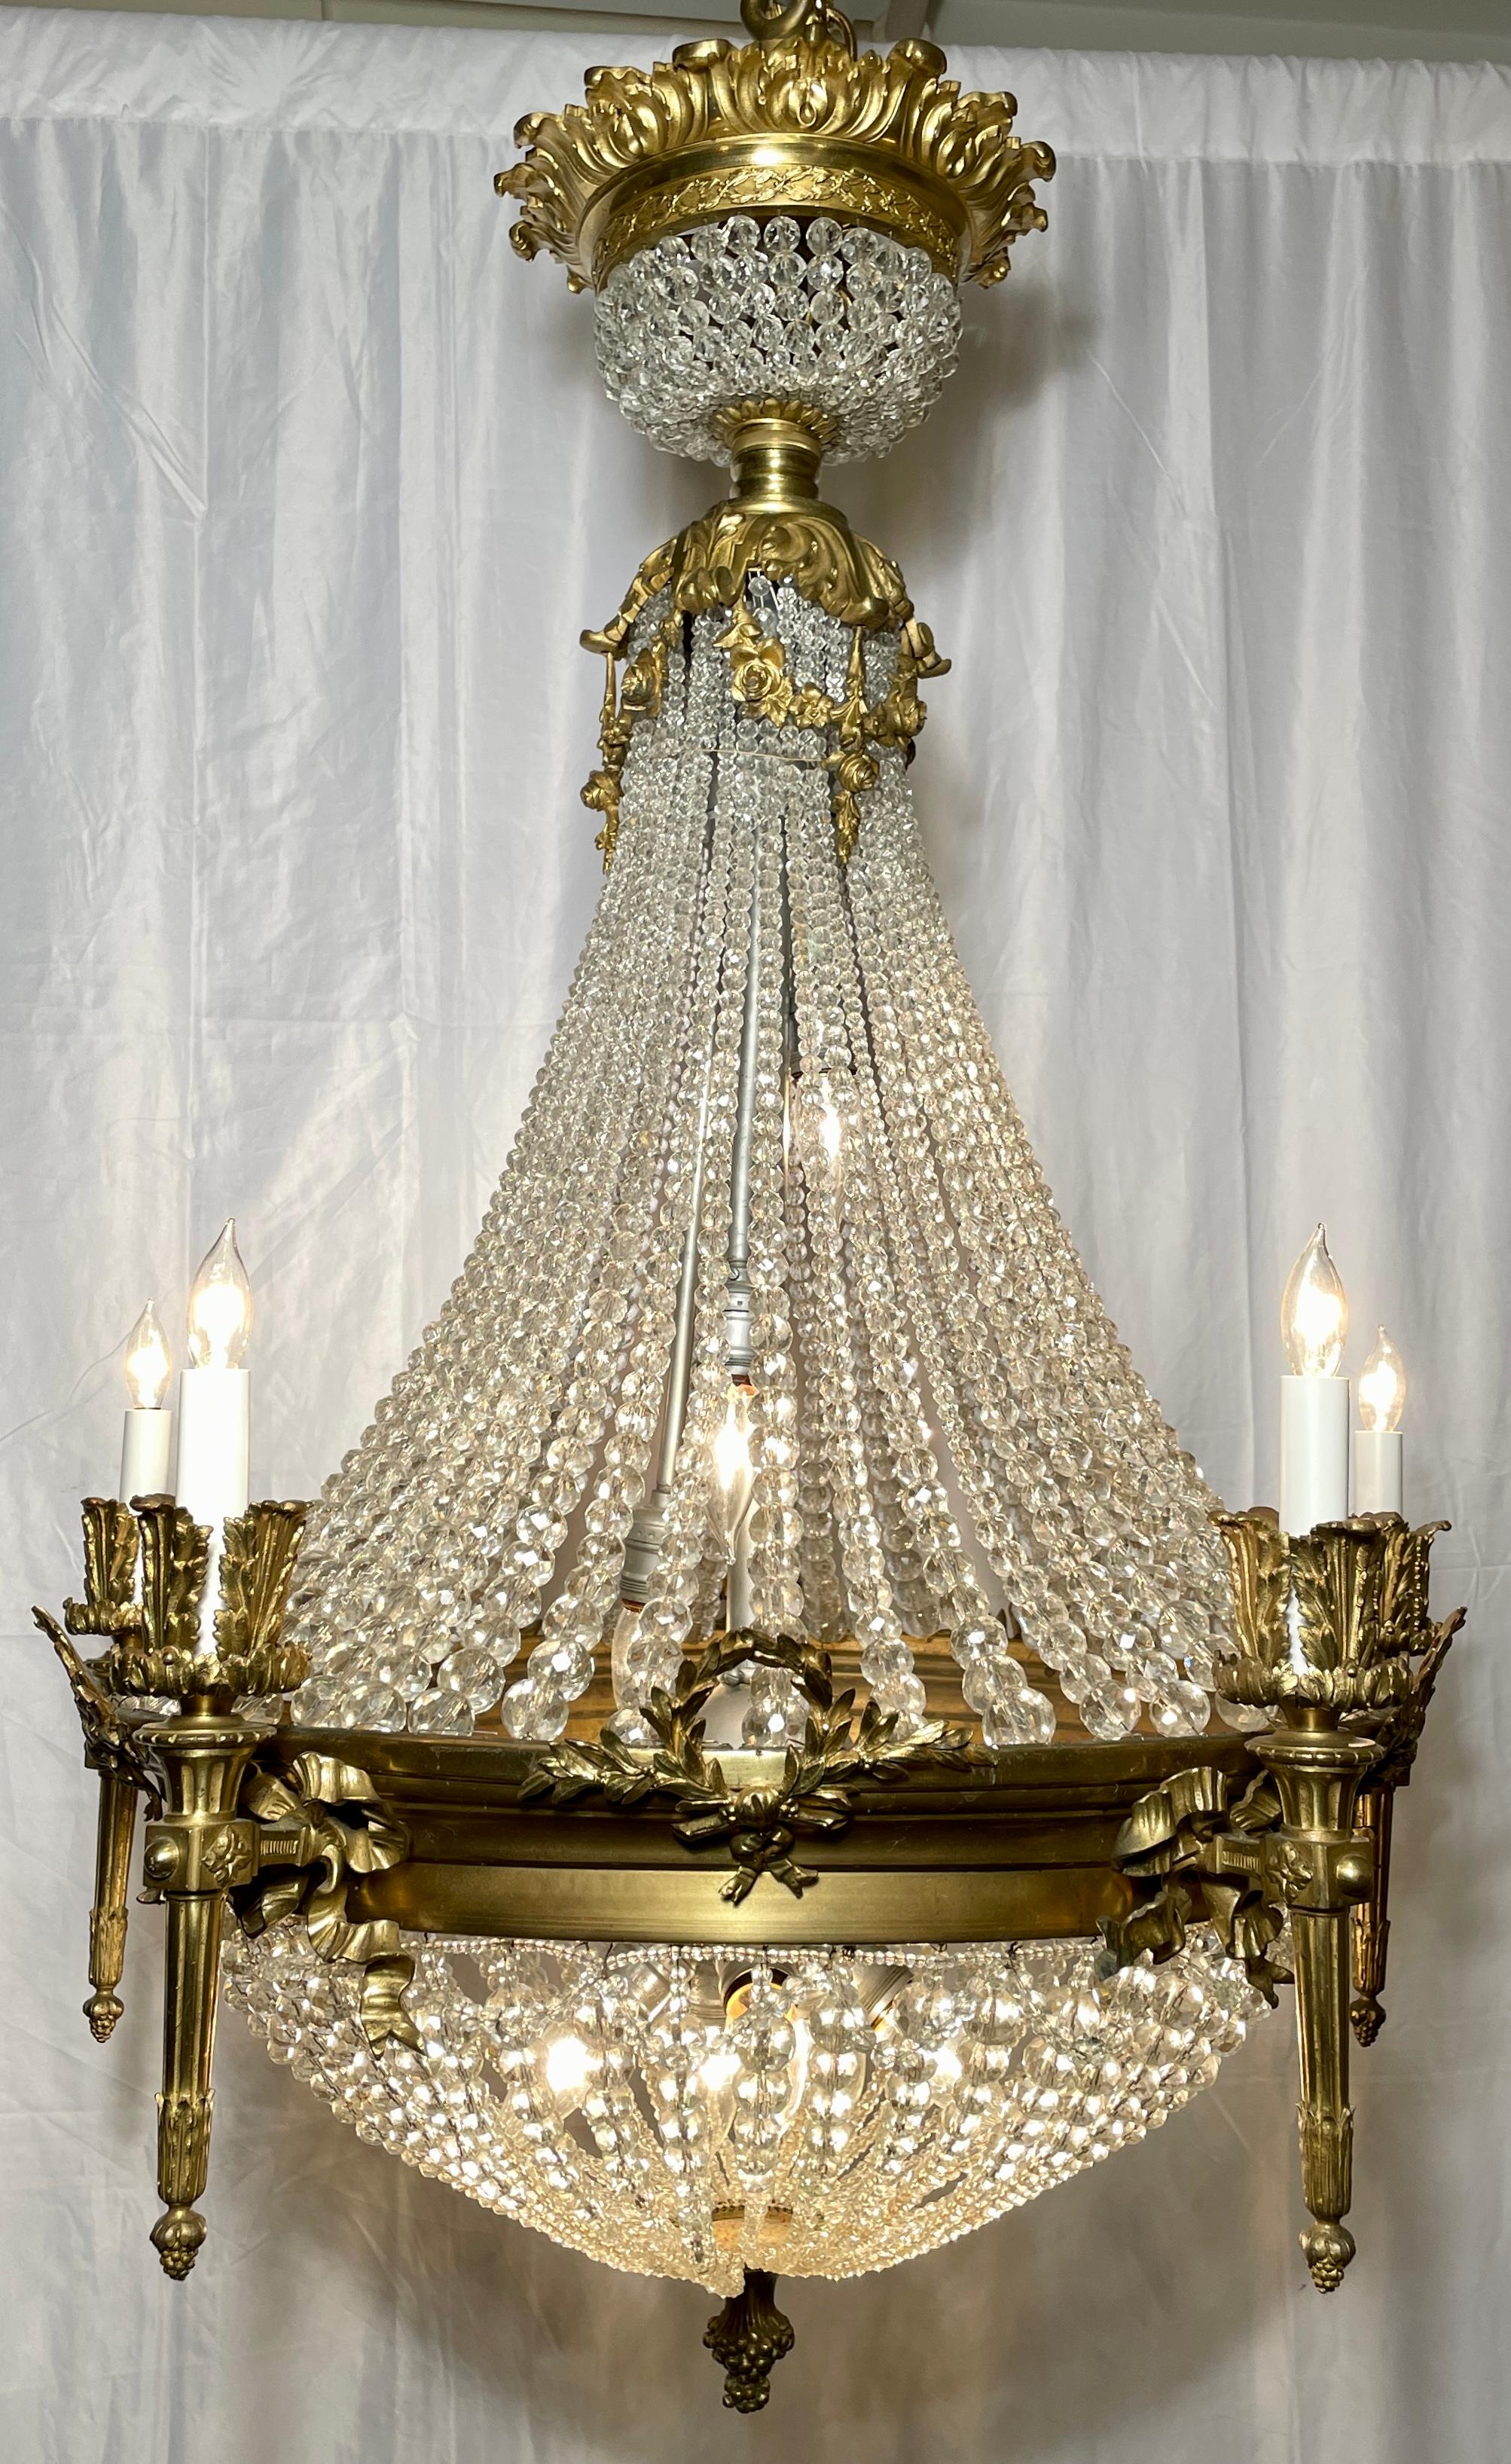 Antique French Louis XVI gold bronze and cut crystal chandelier, circa 1890.